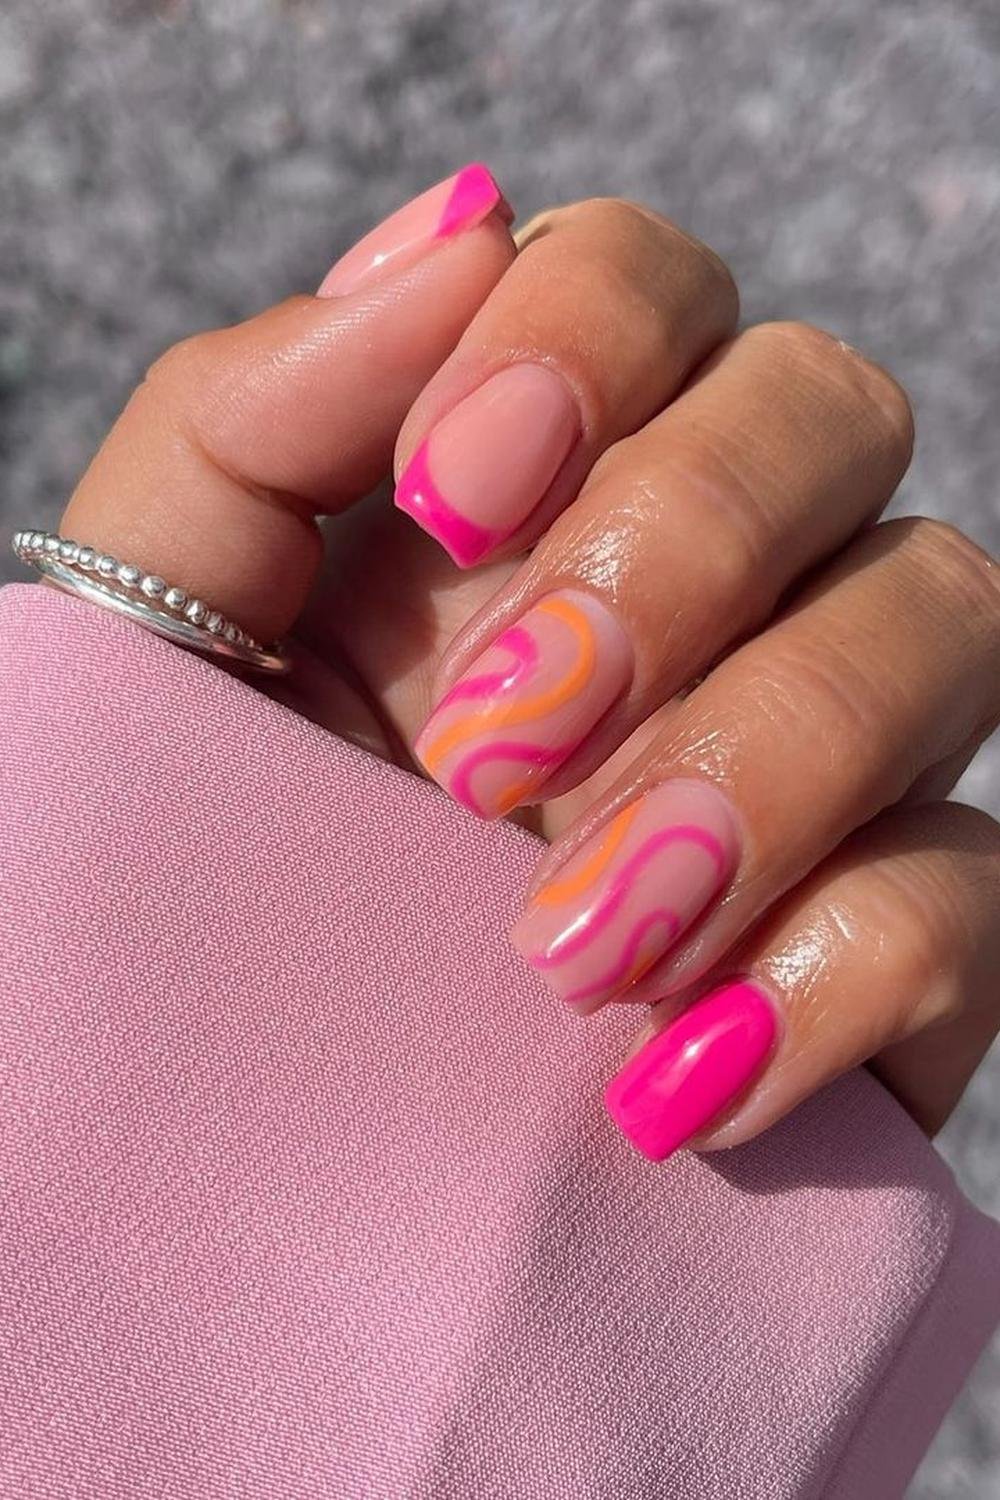 27 - Picture of Pink and Orange Nails